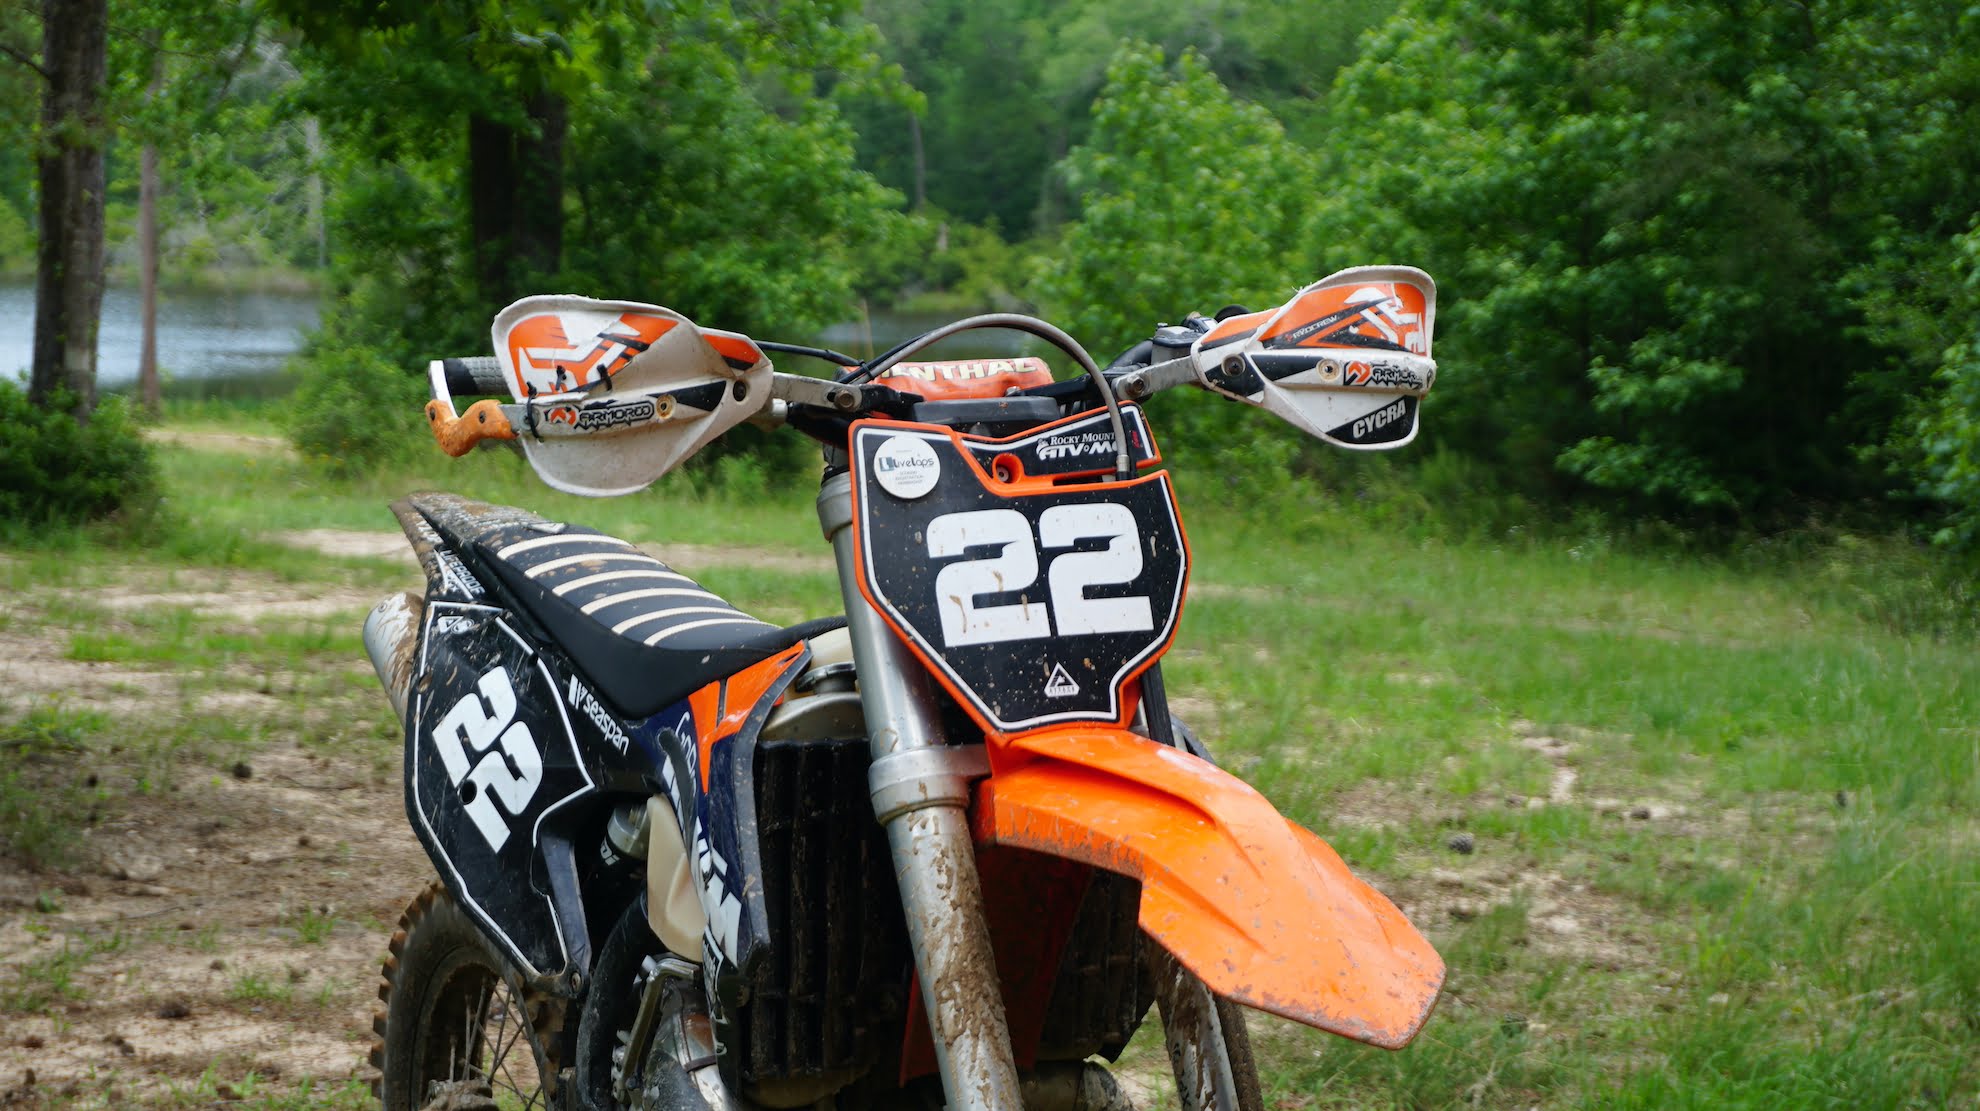 Front side of a muddy dirt bike and handlebars with handguards and a number plate